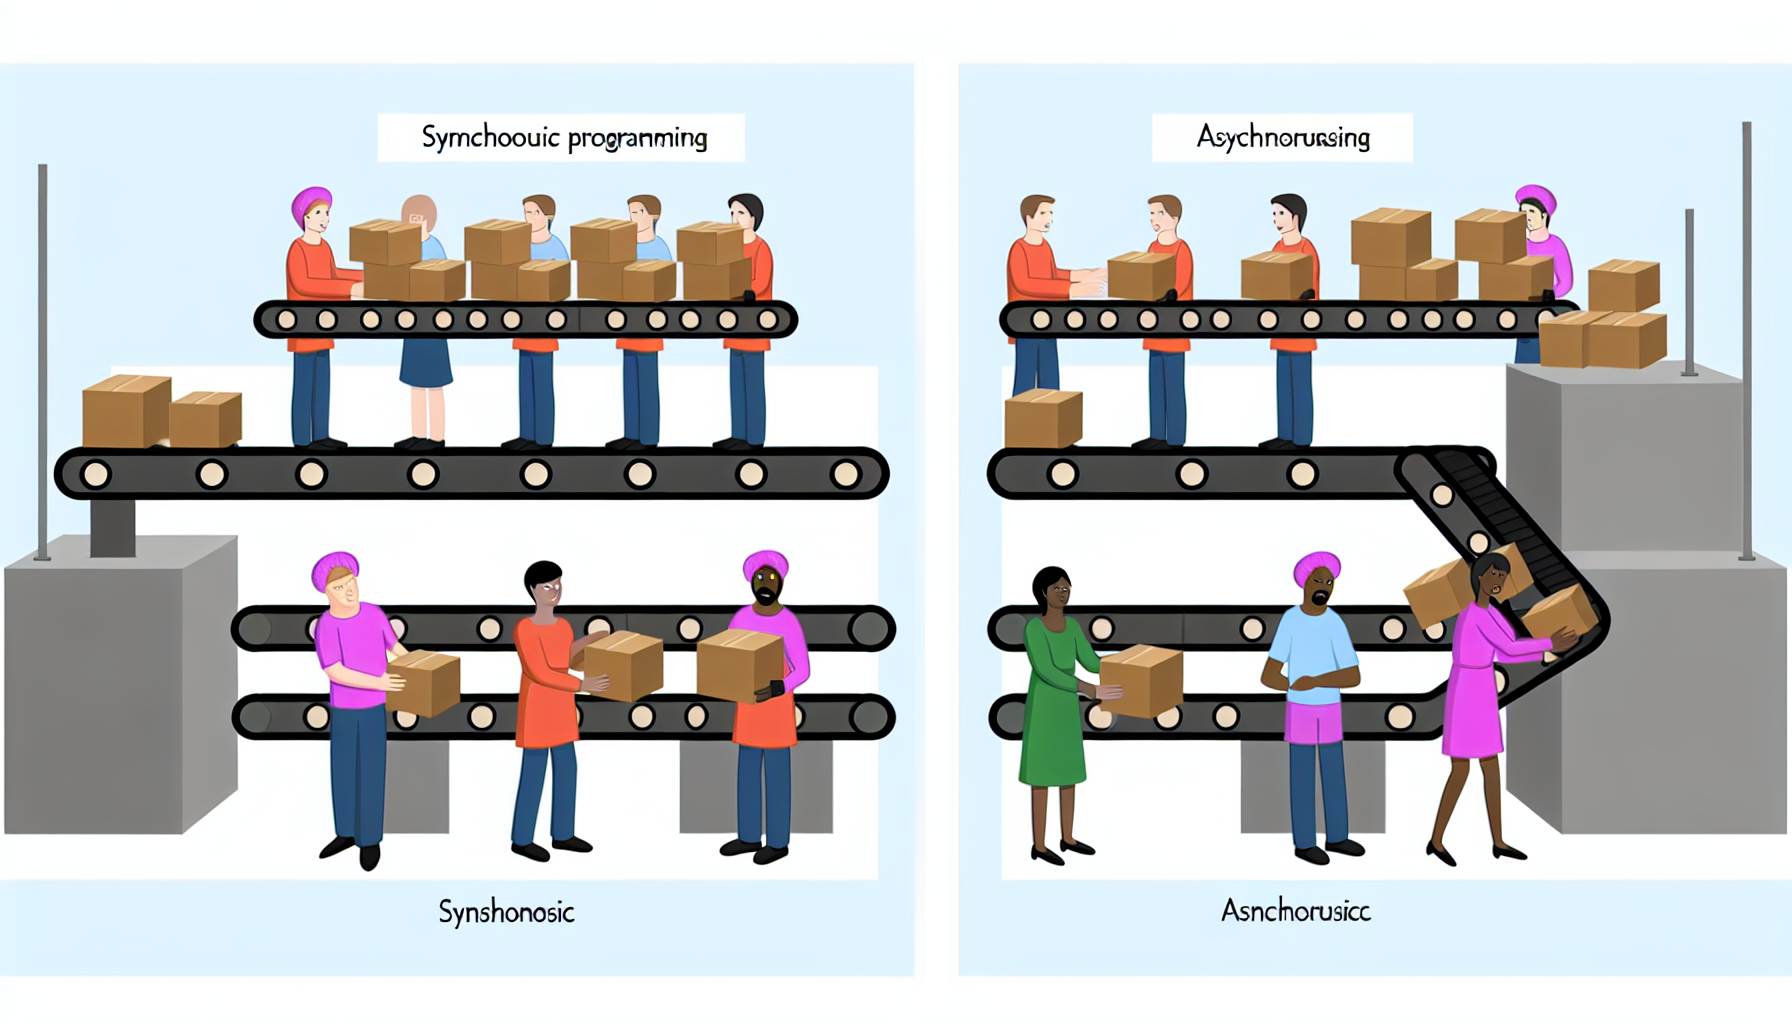 A visual comparison of synchronous vs asynchronous programming